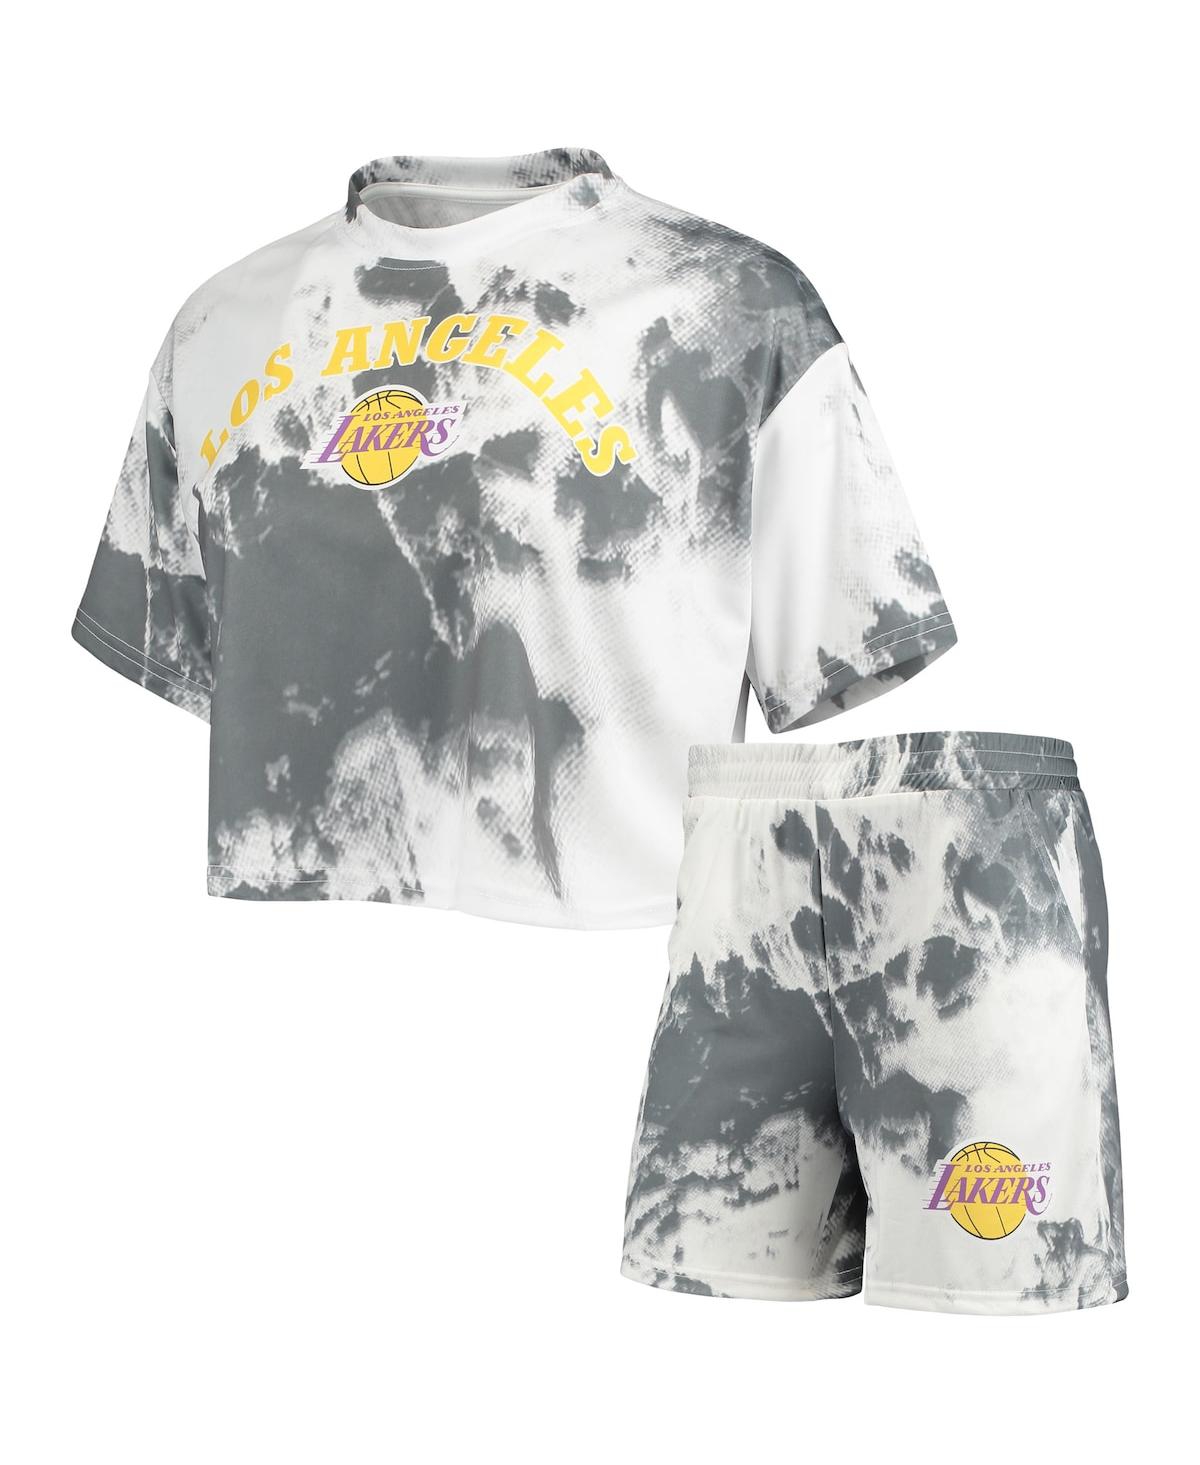 Women's Nba Exclusive Collection White, Black Los Angeles Lakers Tie-Dye Crop Top and Shorts Set - White, Black